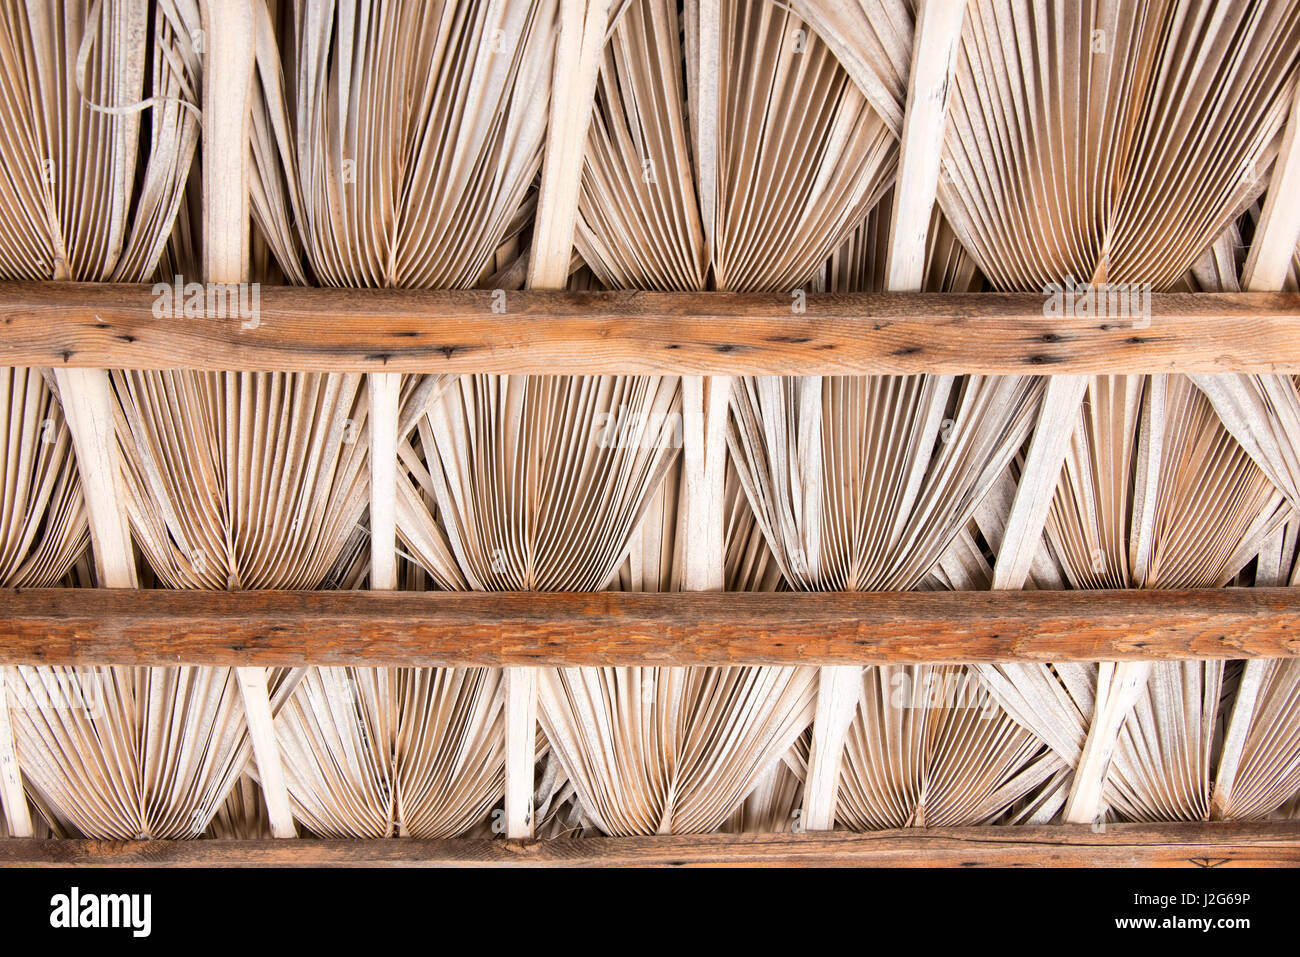 Mexico, Baja California Sur, Sea of Cortez. Palm frond ceiling of shade hut pattern Stock Photo